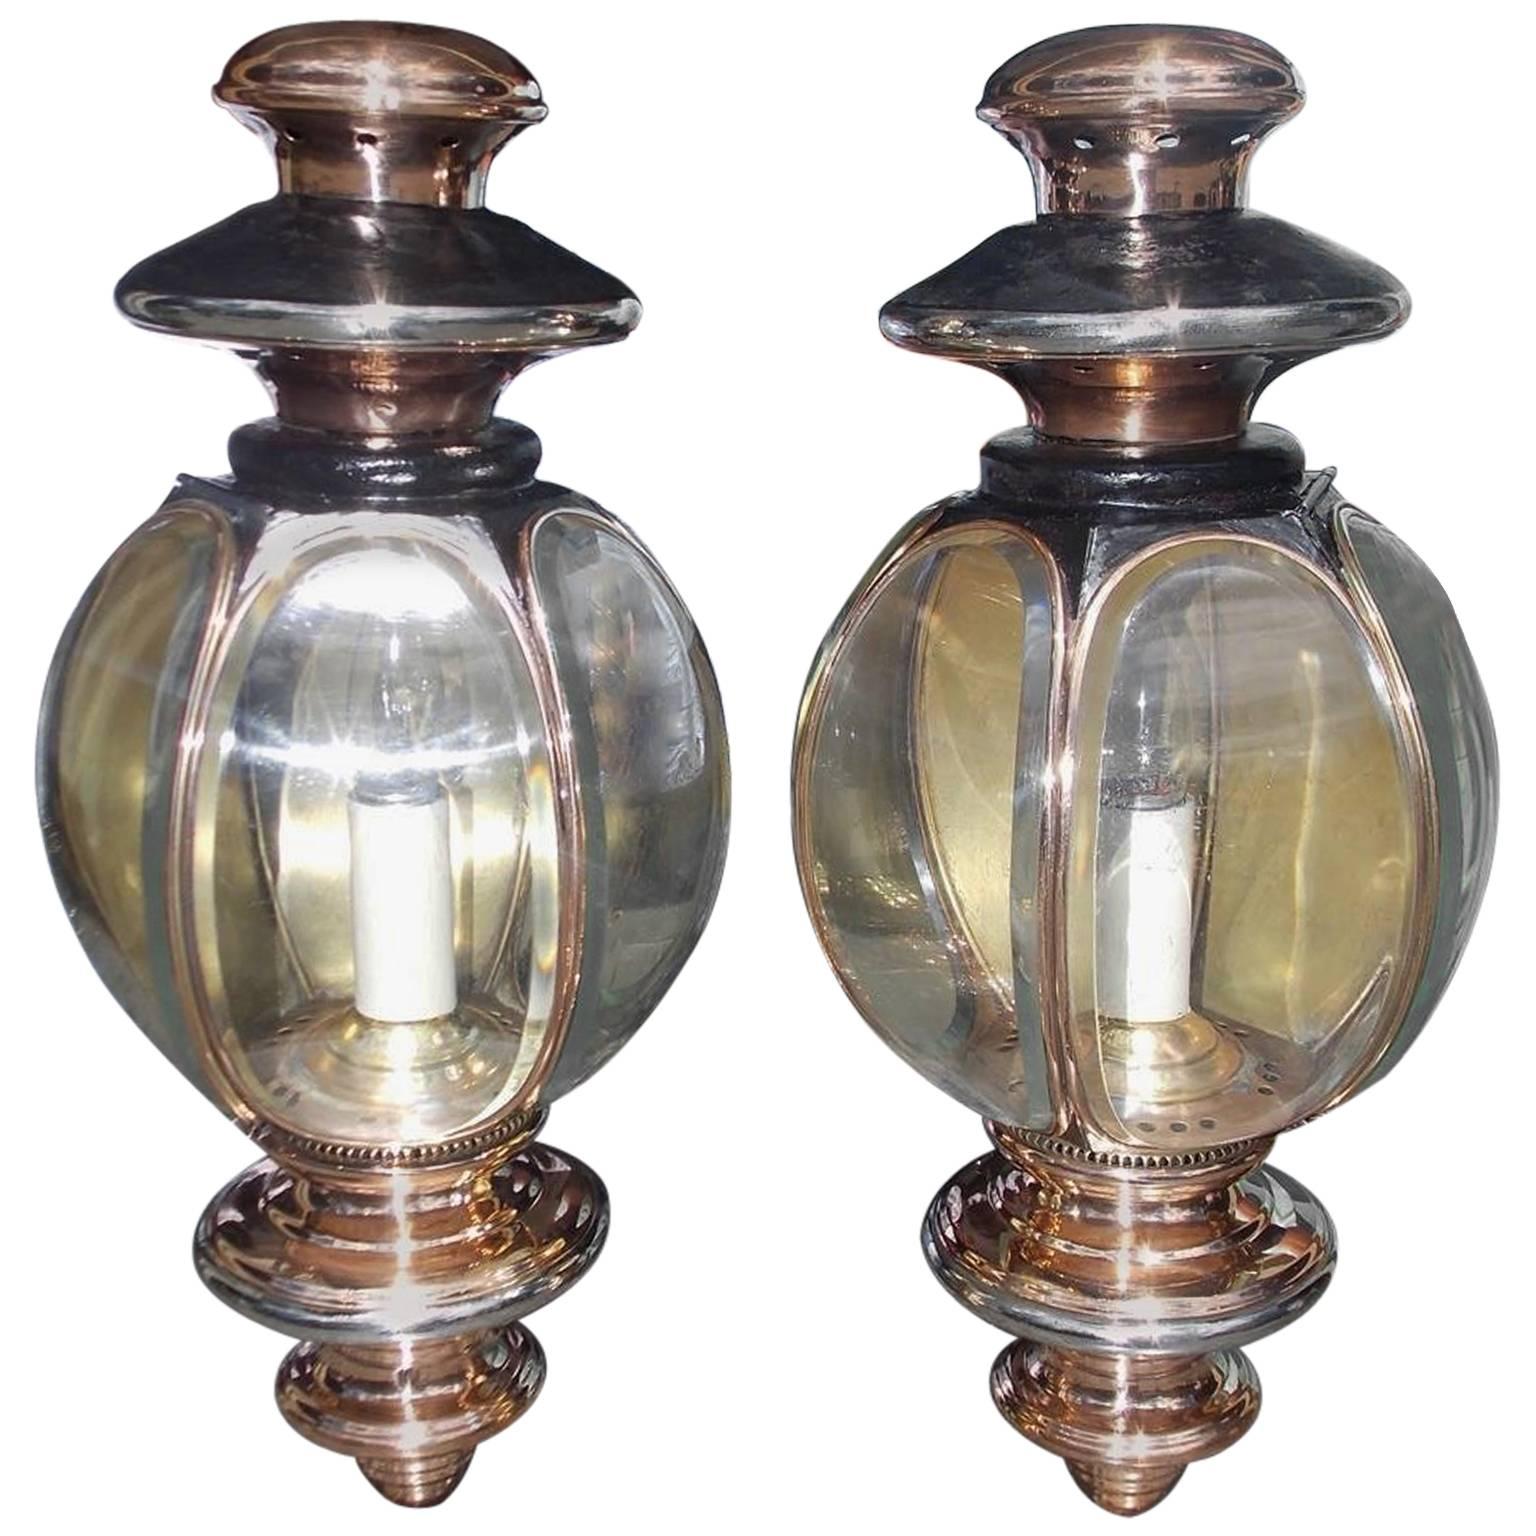 Pair of American Nickel Silver and Copper Coach Lanterns, New Haven, Circa 1860